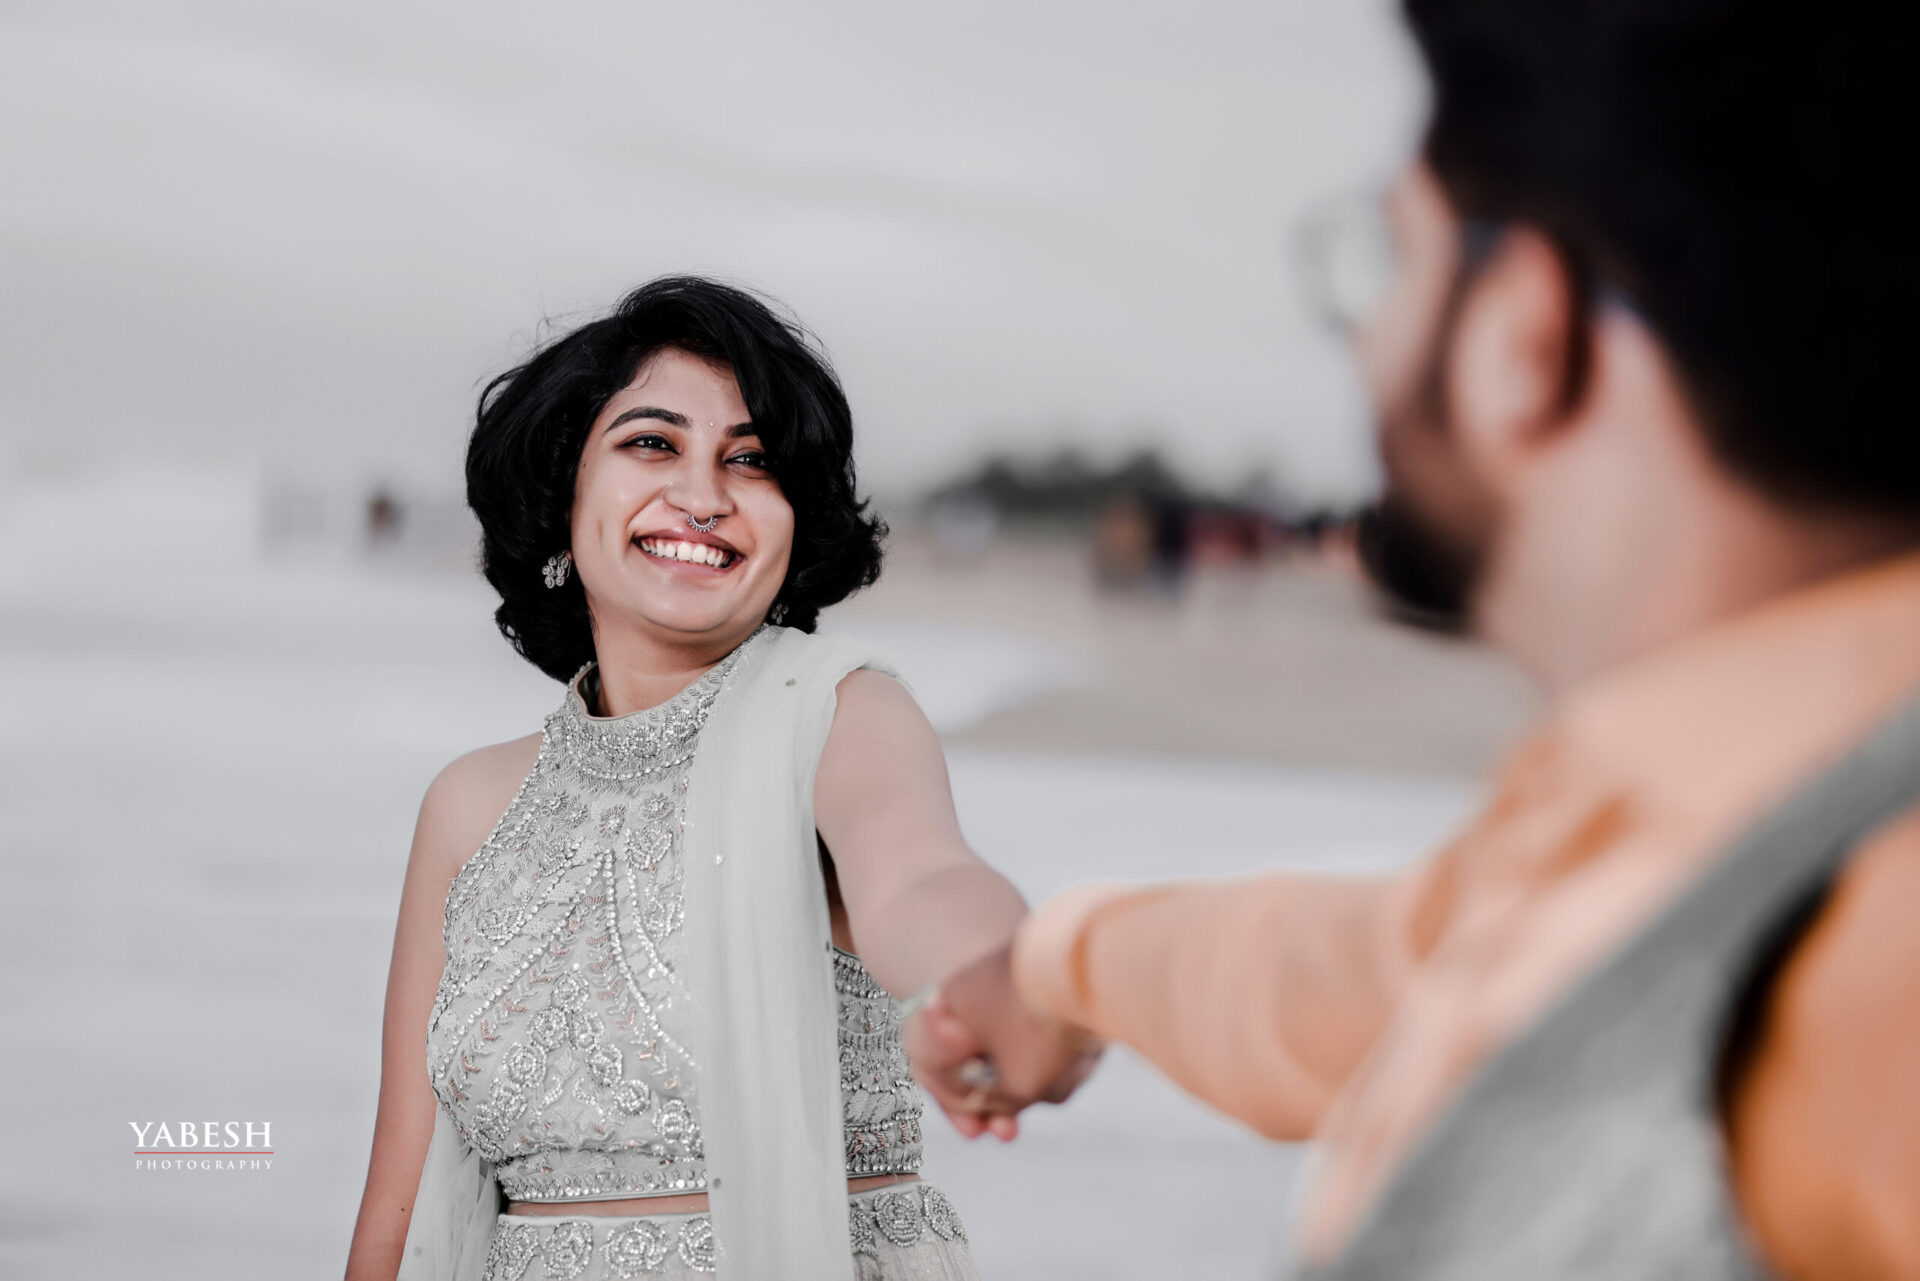 Capture Love: 15 Dazzling Pre-Wedding Photoshoot Ideas, Tips & Poses for  2023